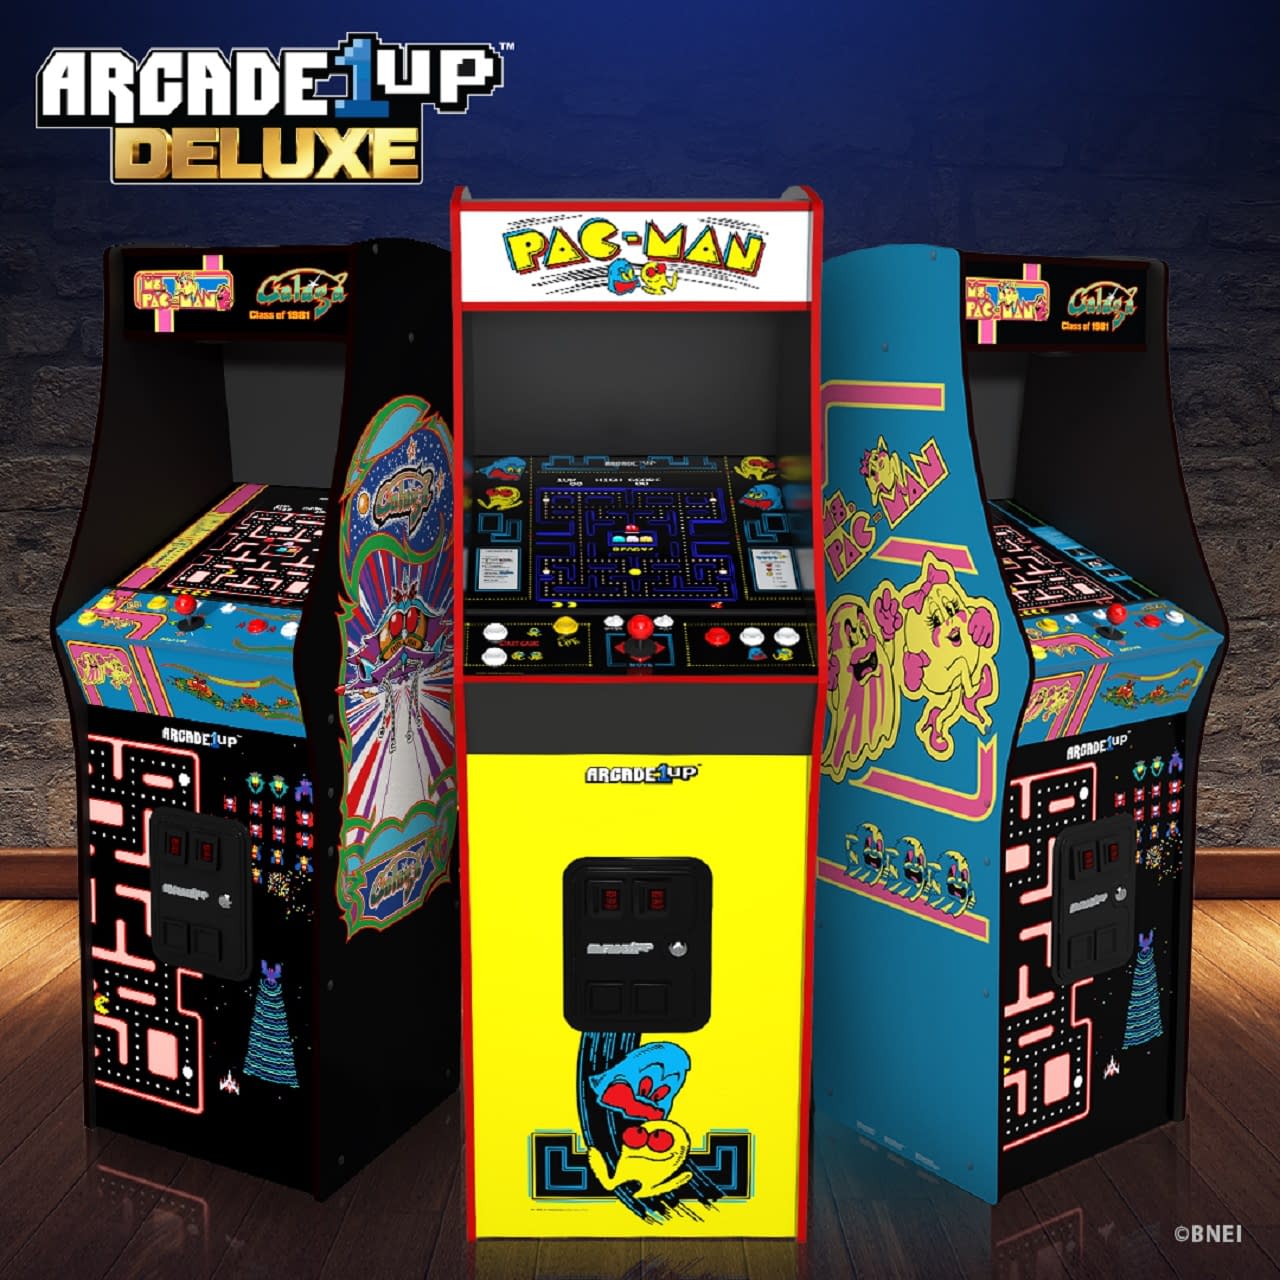 Arcade1Up Releases Deluxe Edition Arcade